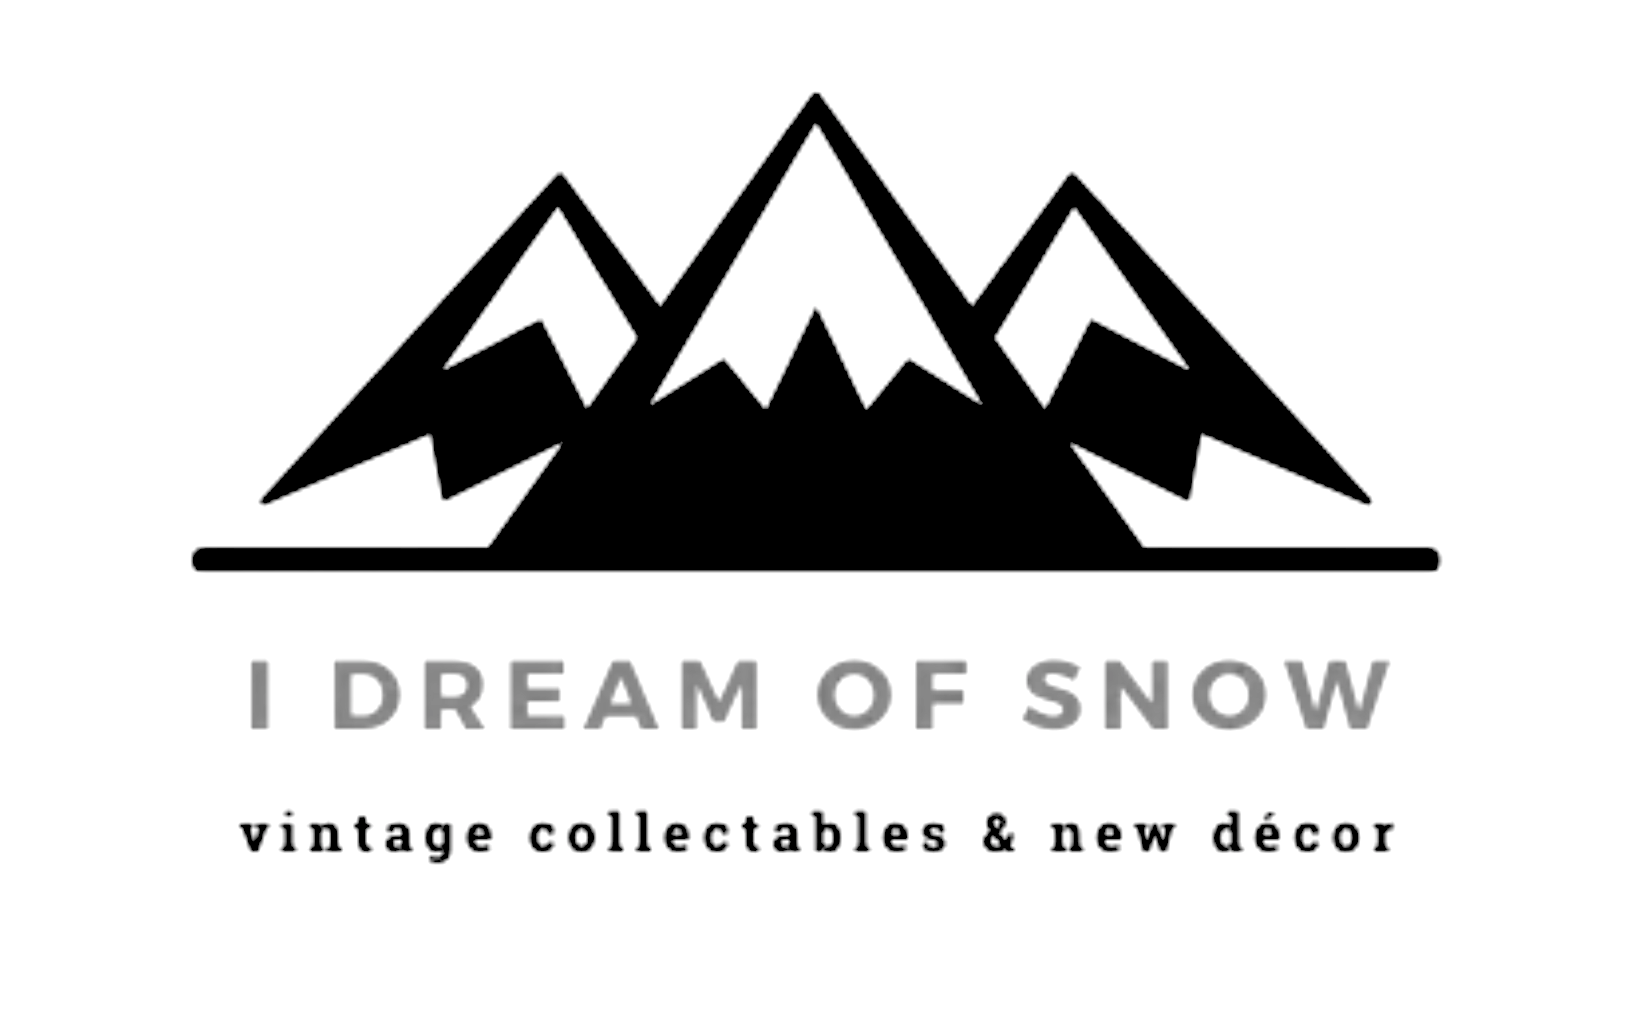 I Dream Of Snow Vintage Collectables & New Decor logo